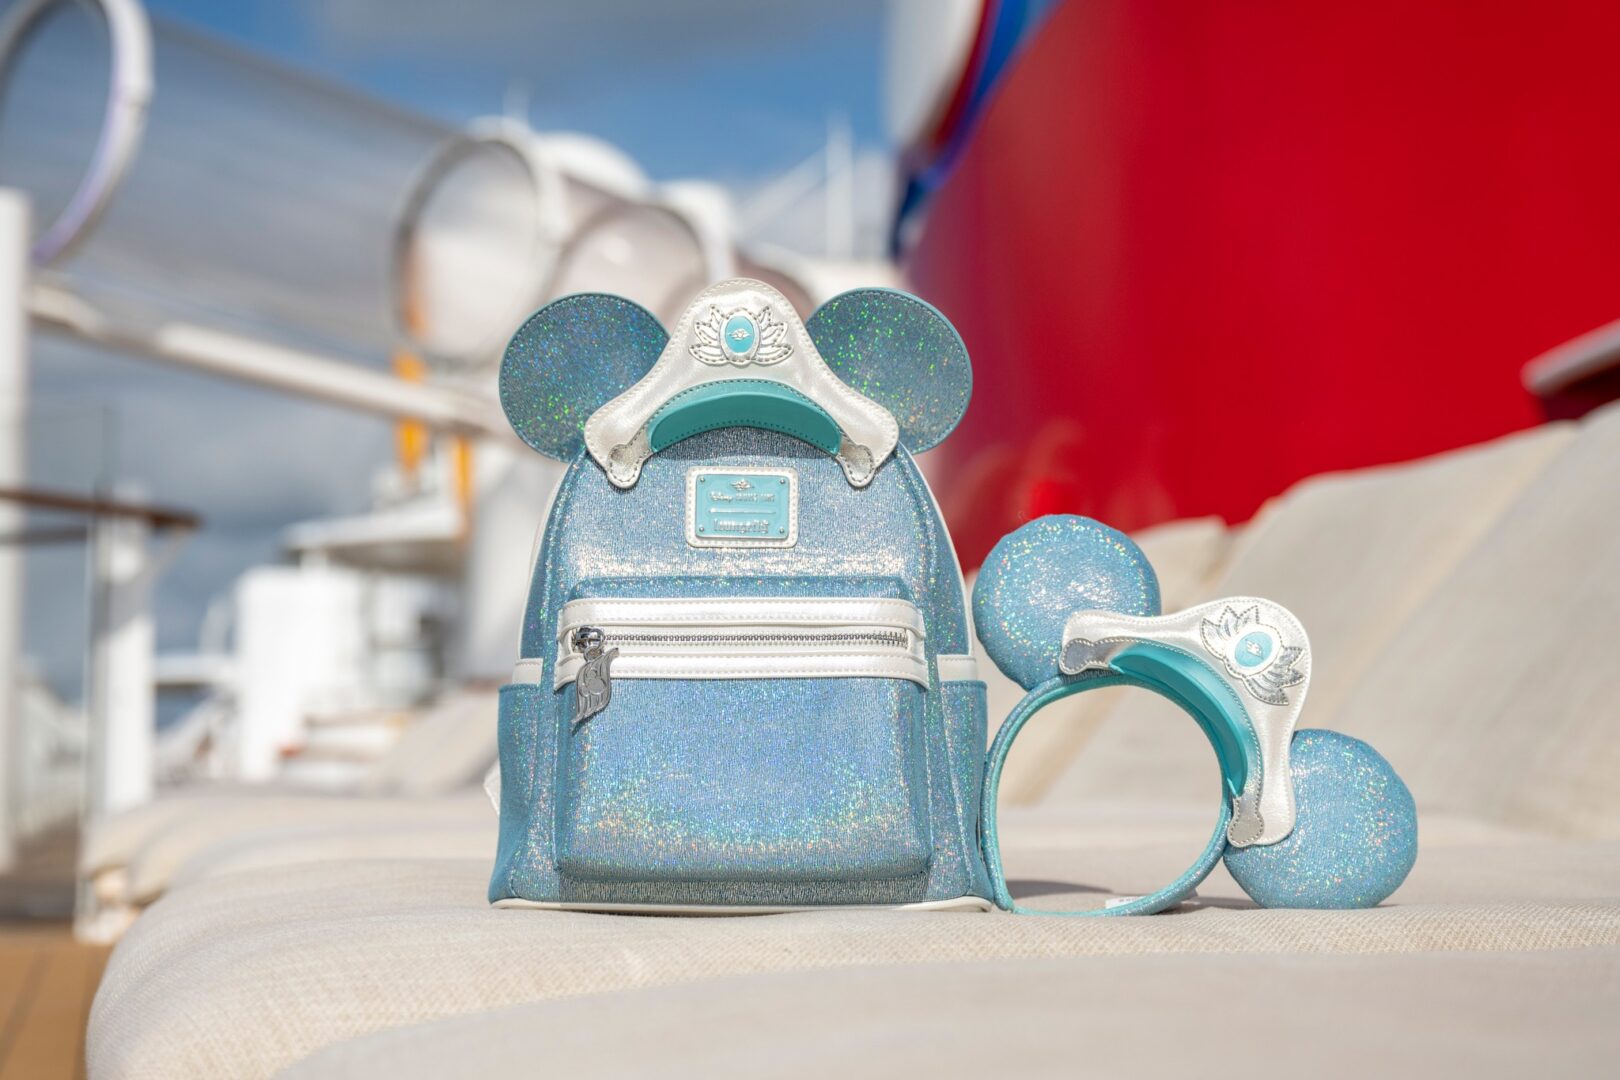 First look at the new Shimmering Seas Collection for Disney Cruise Line’s 25th Anniversary